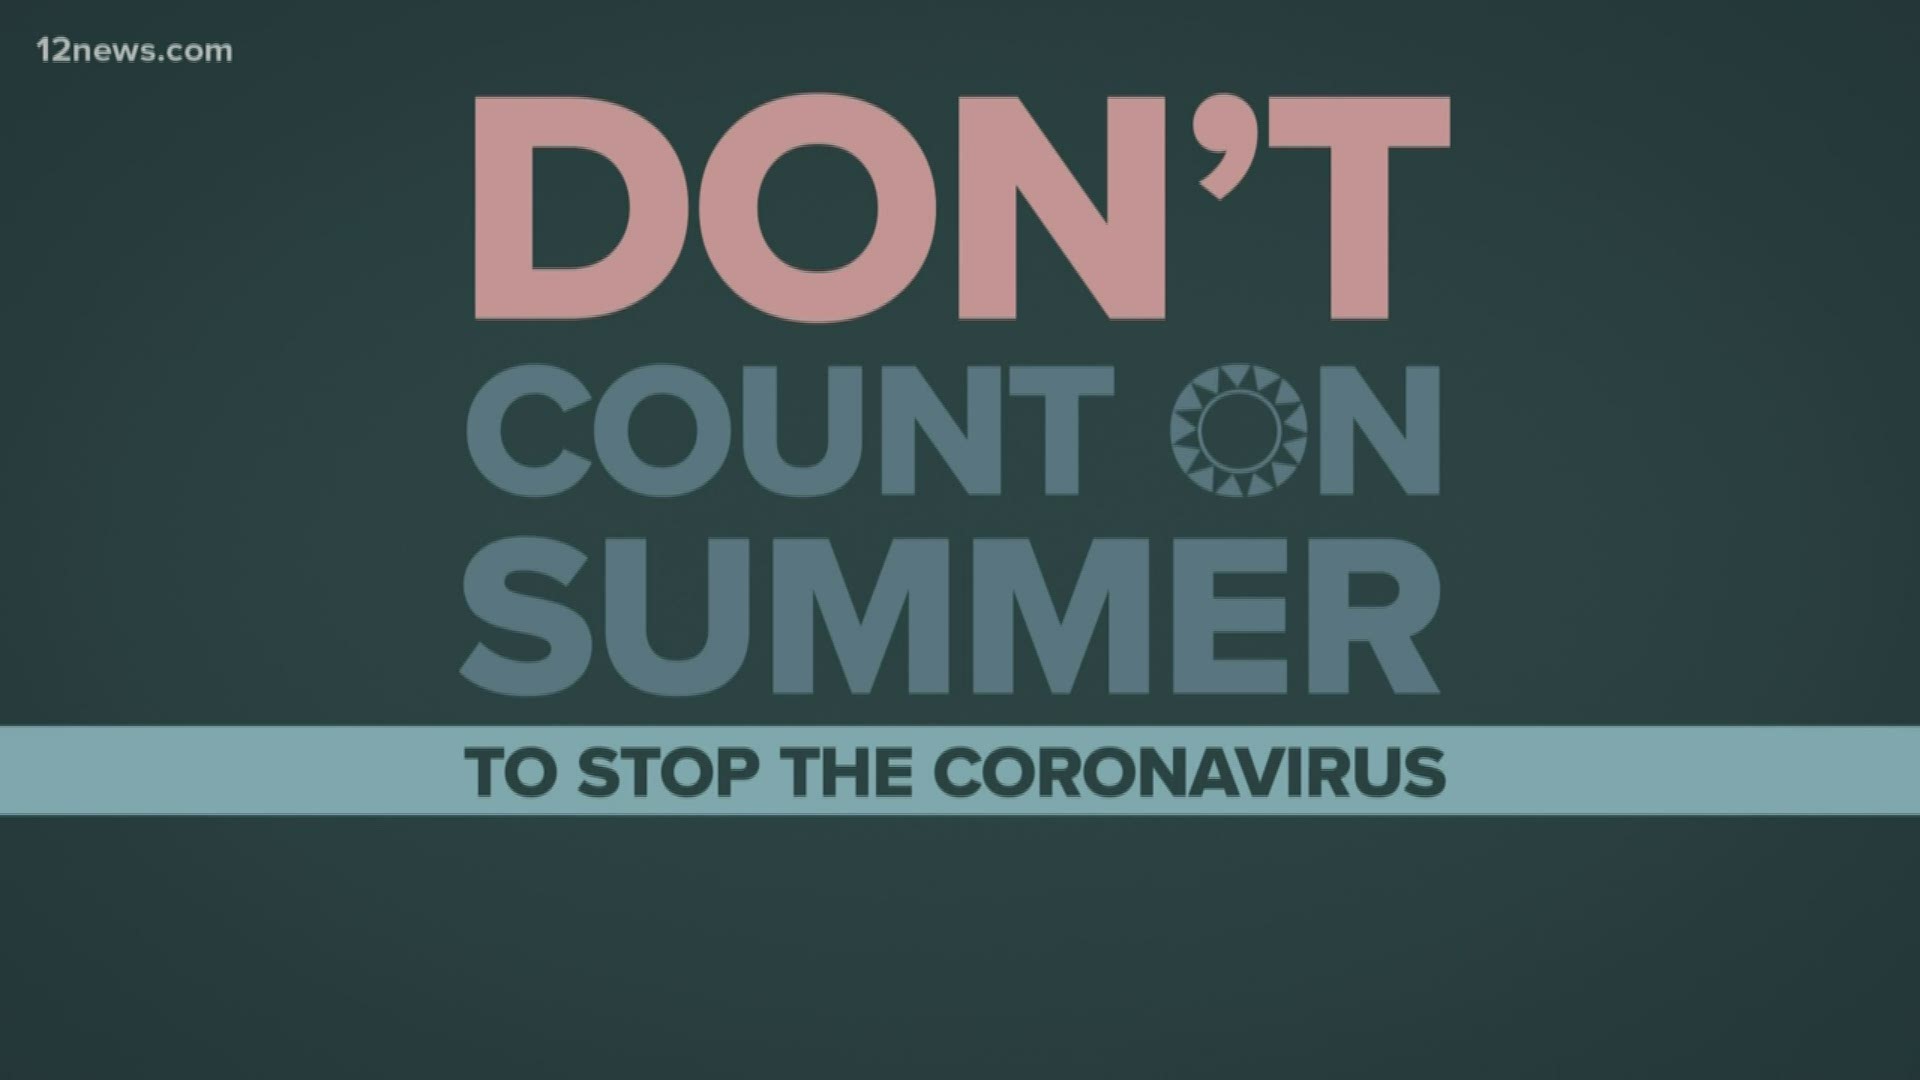 Data shows we can't count on heat to kill COVID-19 virus. Hot regions are still seeing the virus spread.